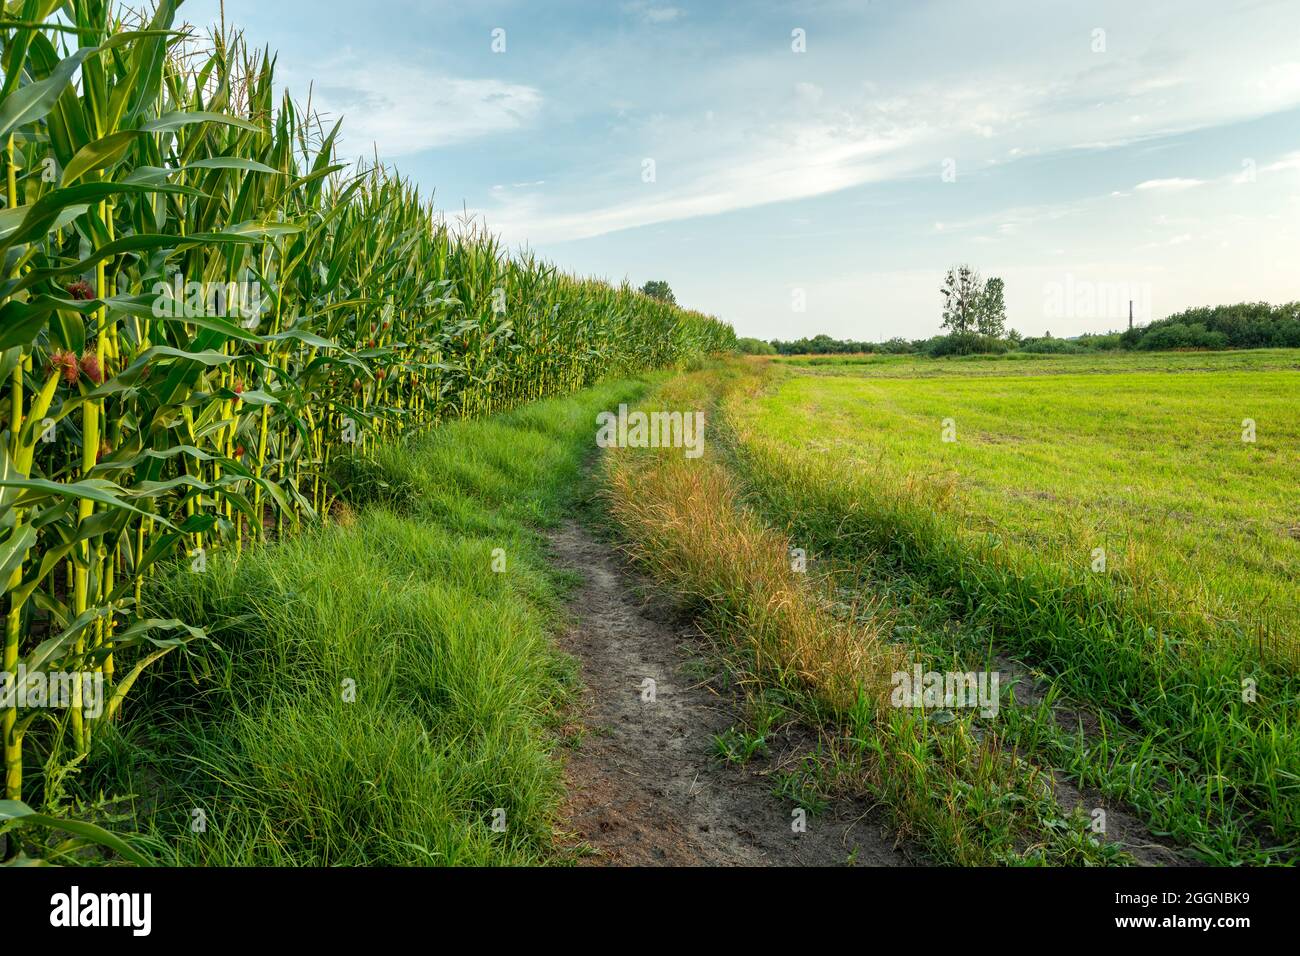 Dirt road next to the corn field Stock Photo